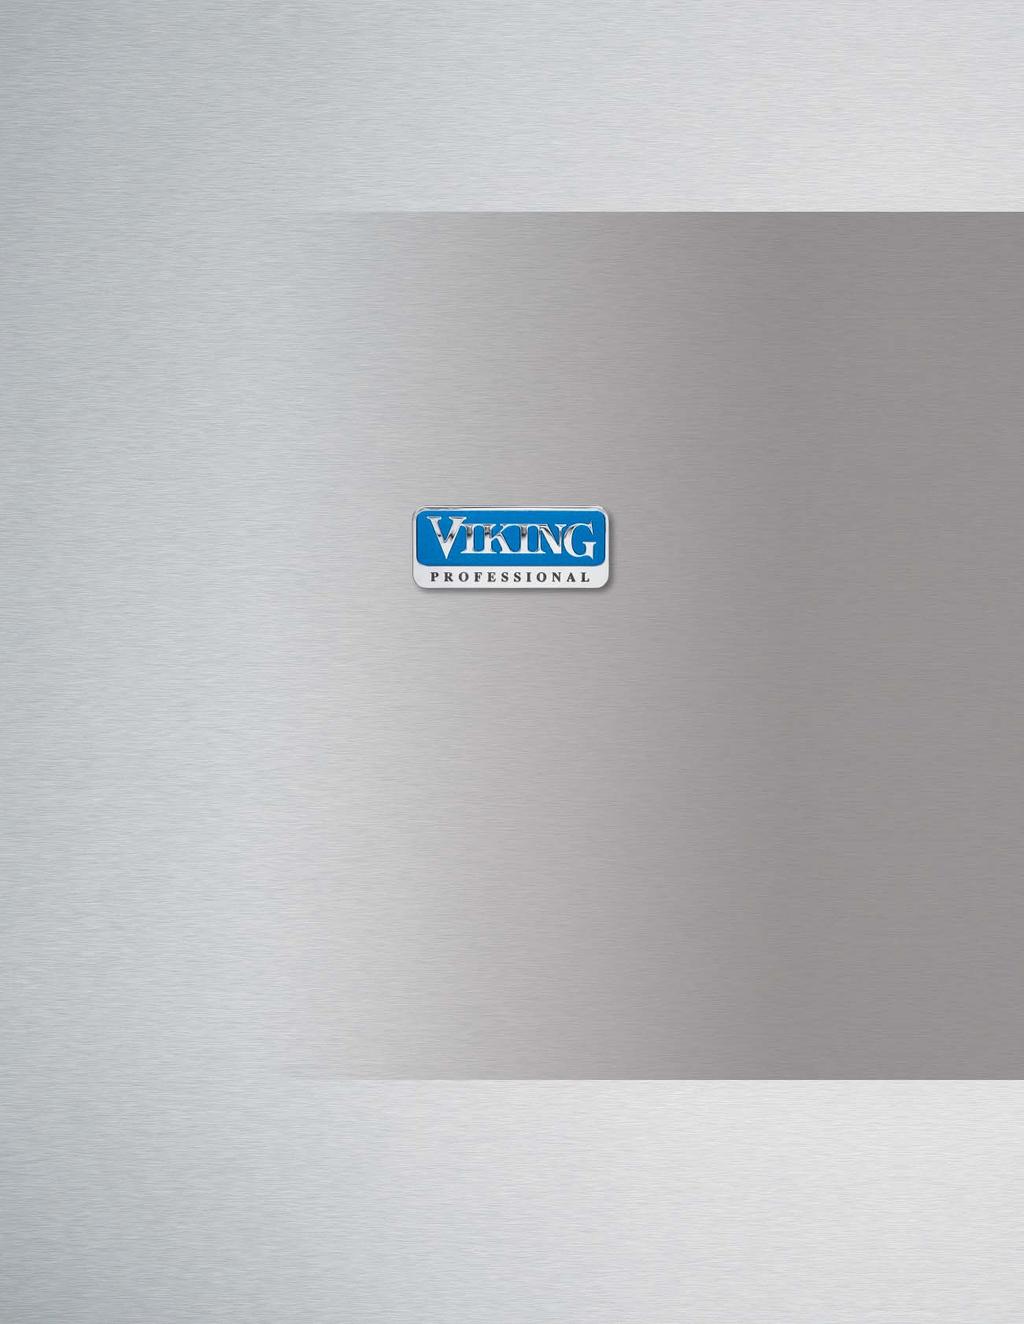 The Viking Professional Line of ventilation products offer the classic Viking look heavy-duty, yet stylish.